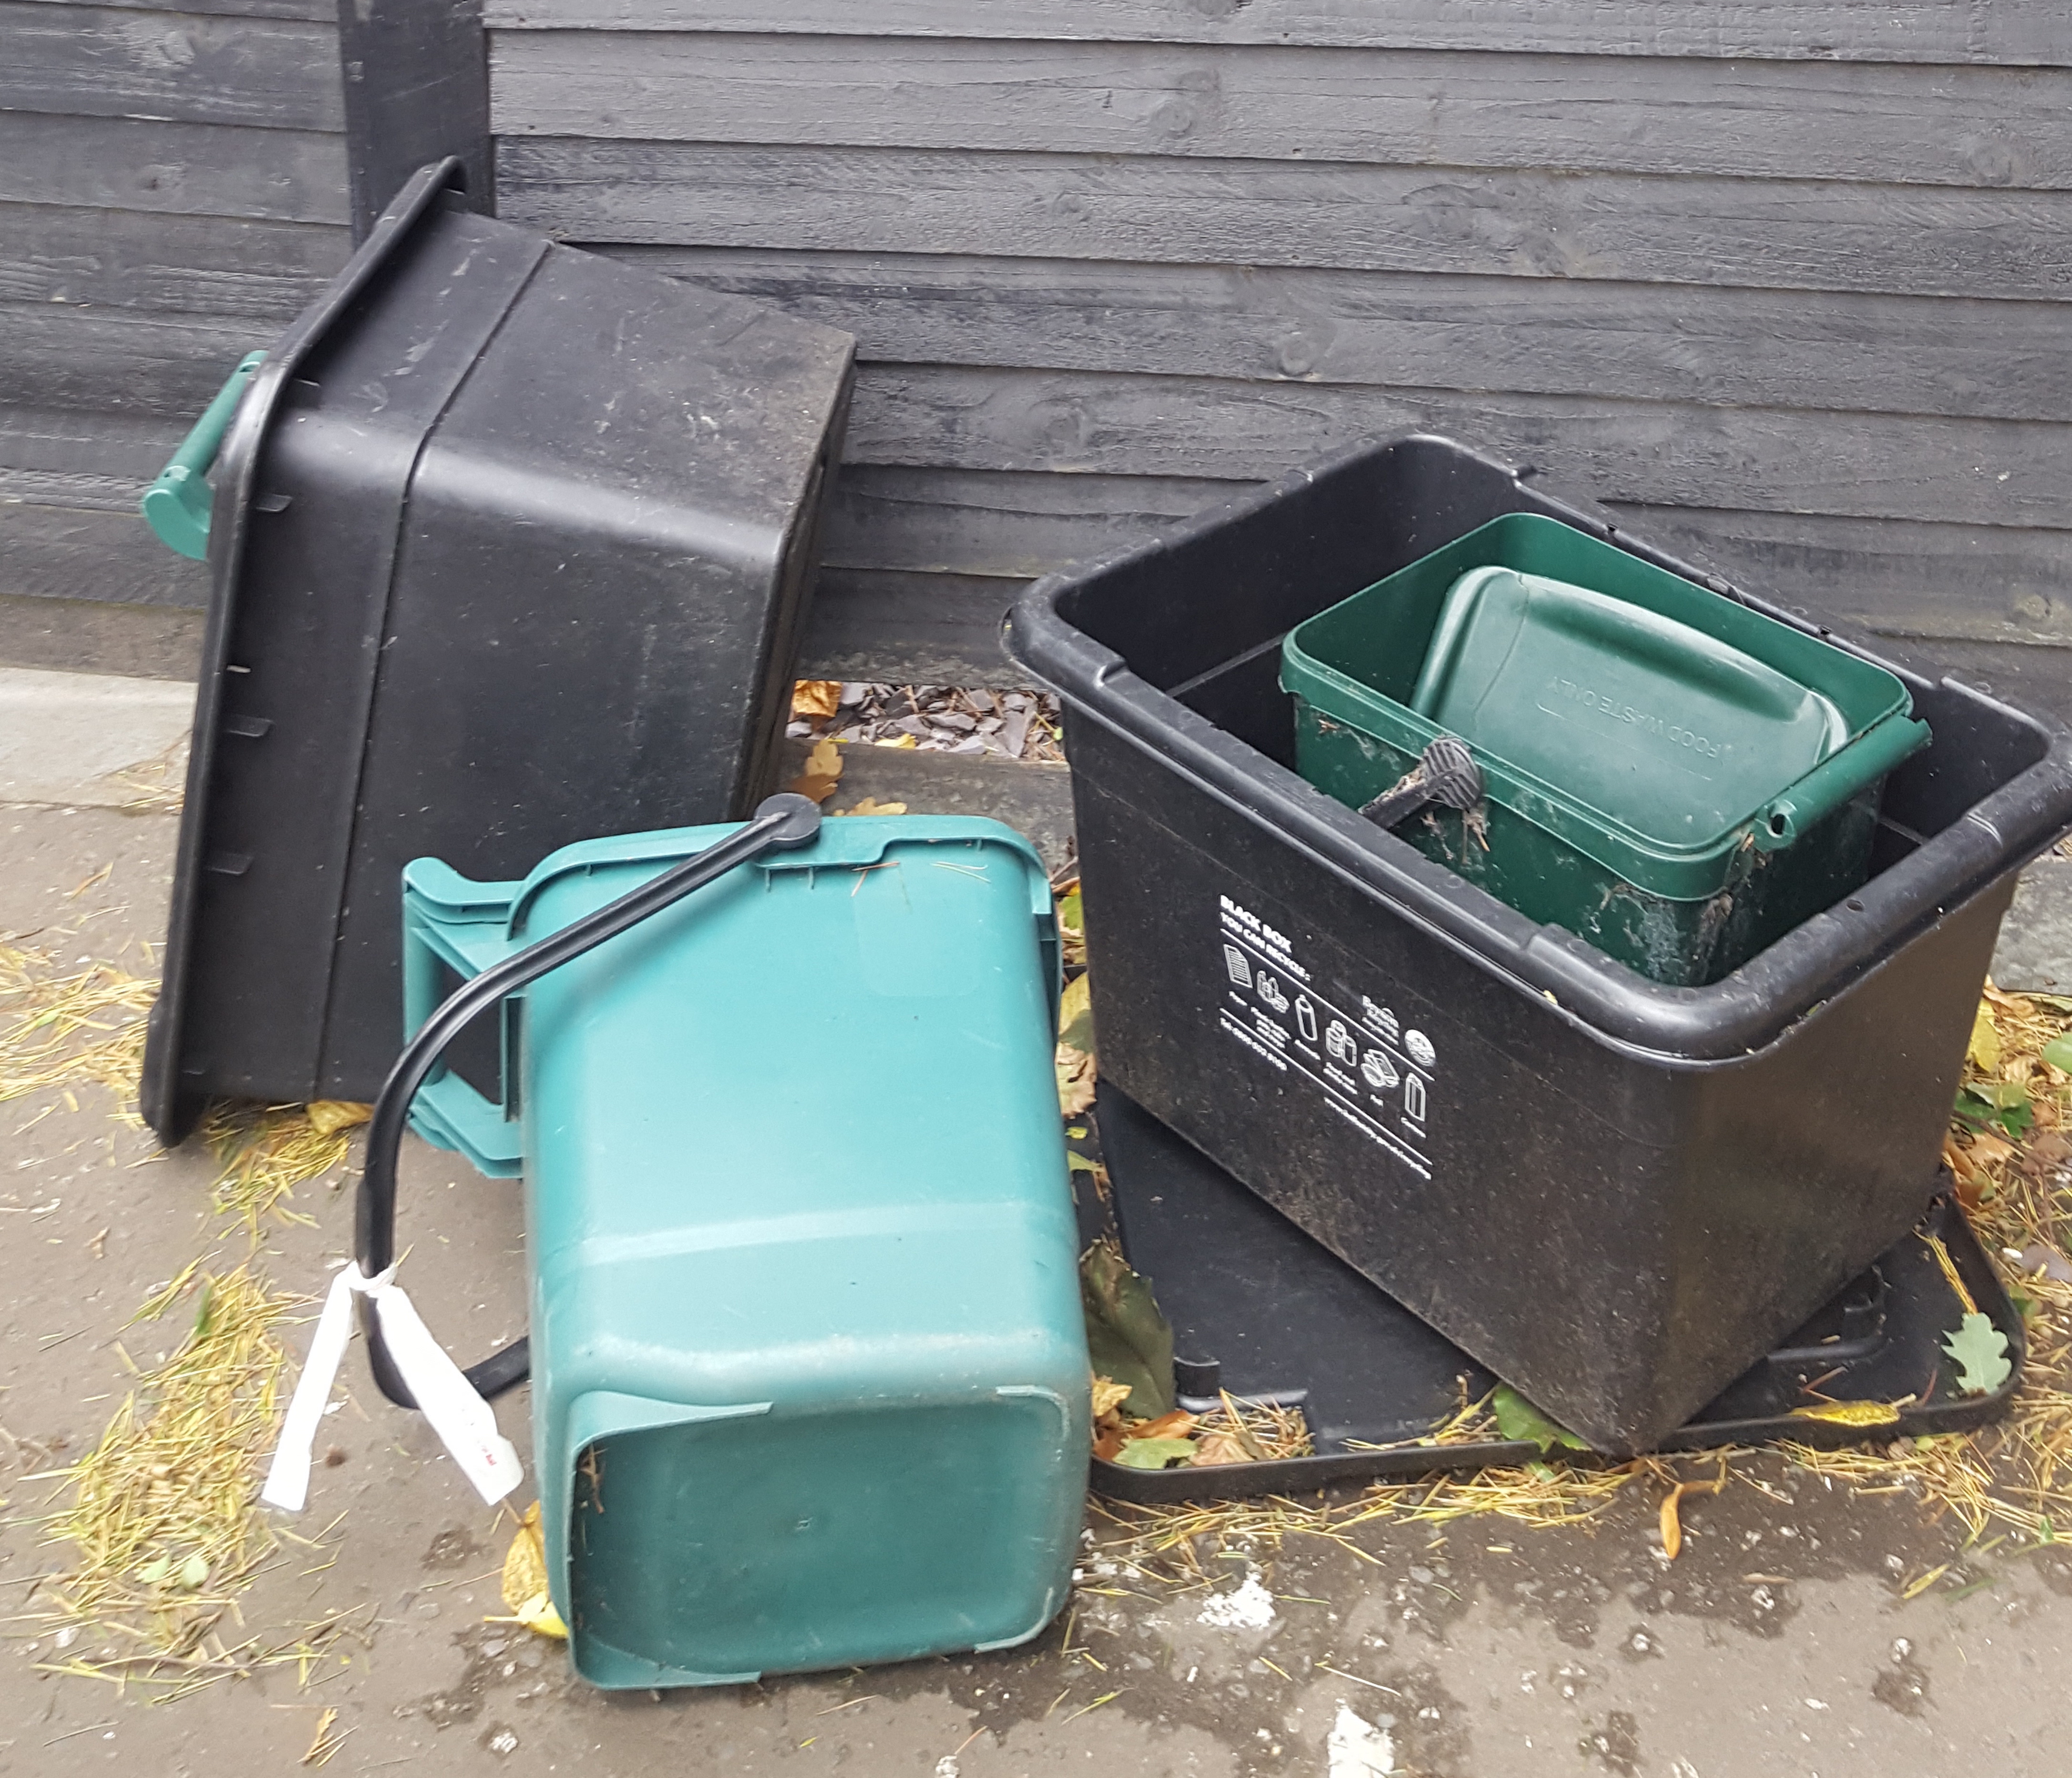 National poll highlights need for simplicity and convenience in council recycling services